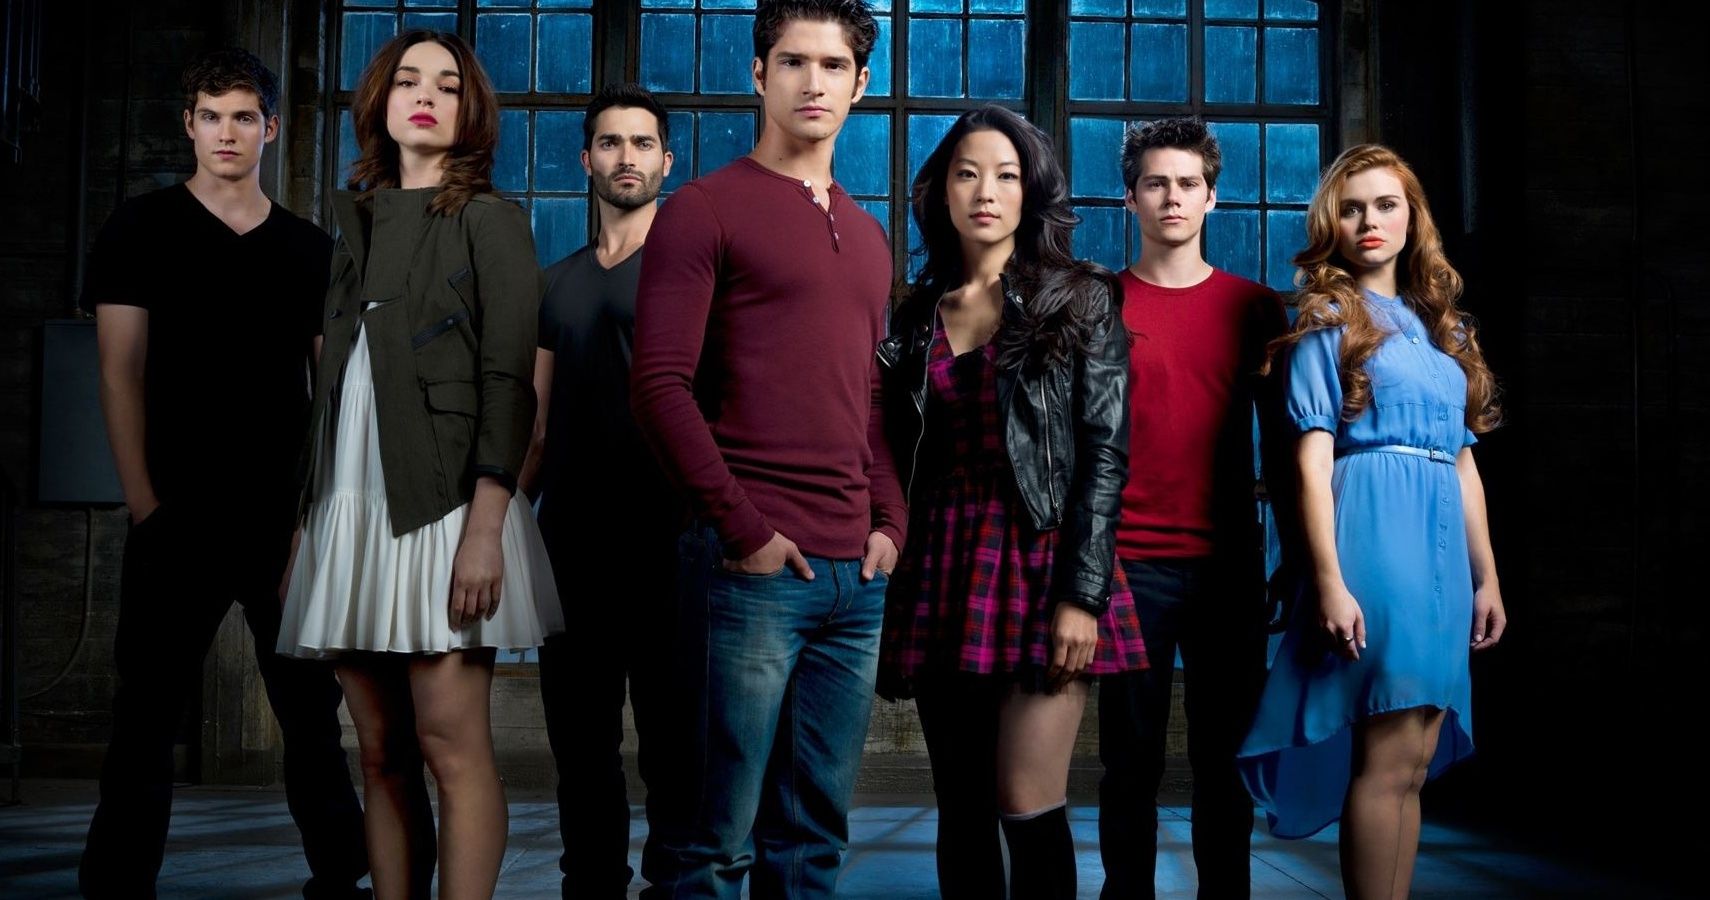 Which Teen Wolf Character Are You Based On Your Zodiac Sign?